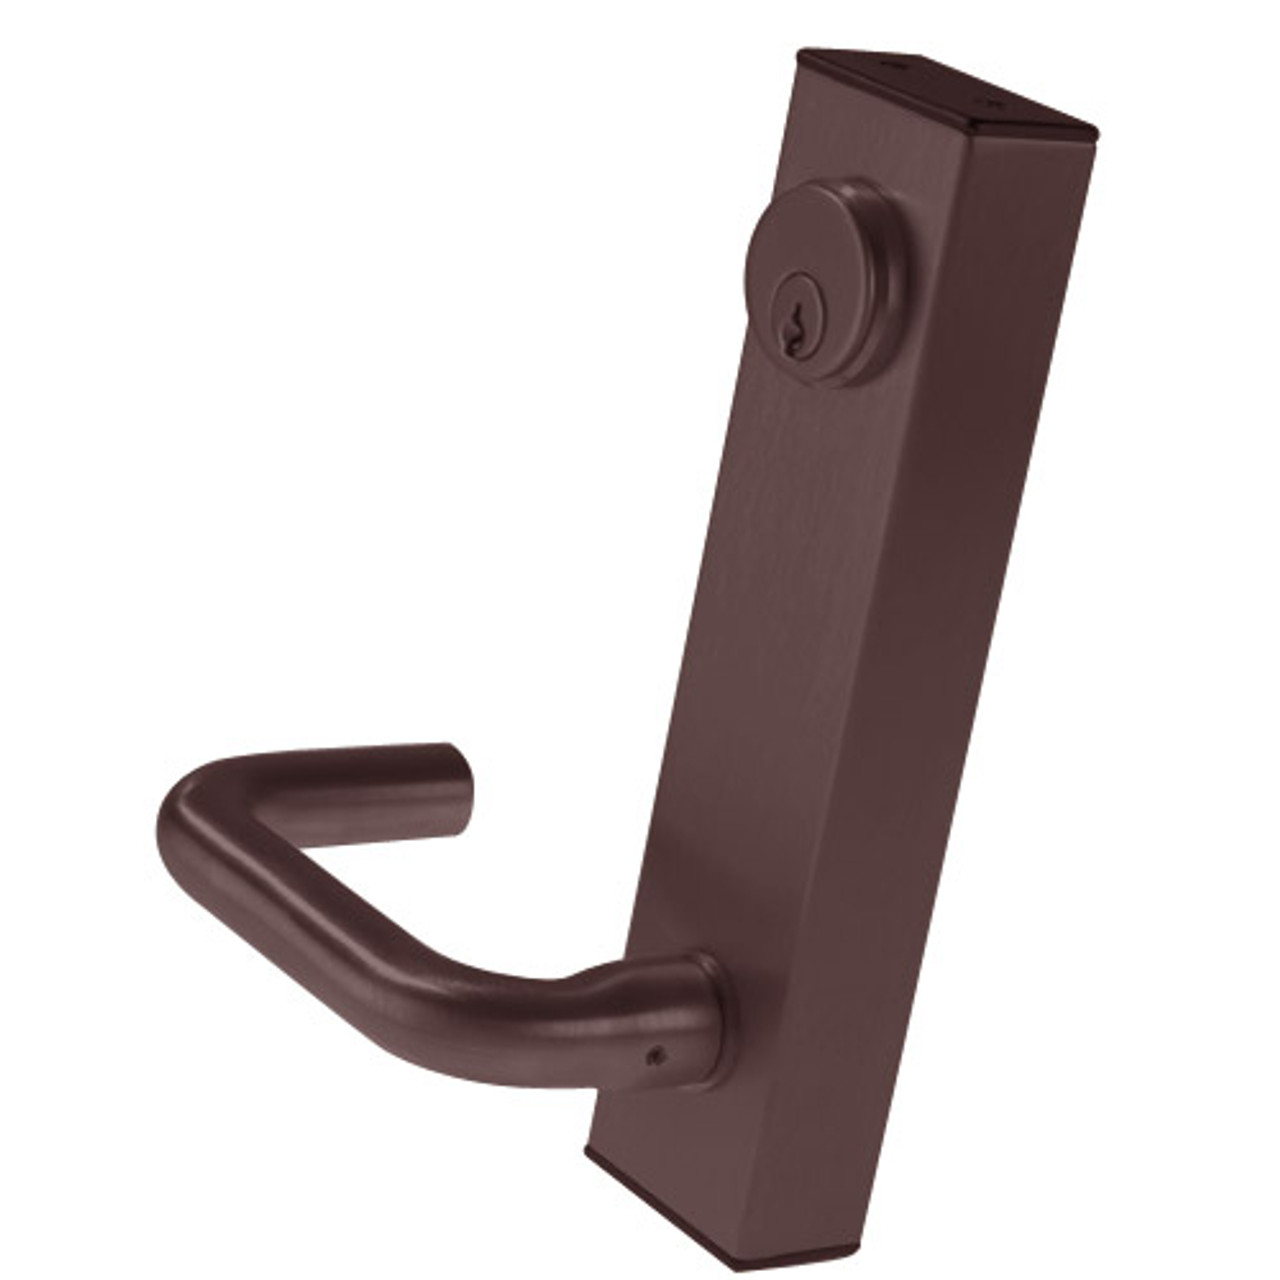 3080-02-0-31-US10B Adams Rite Standard Entry Trim with Round Lever in Oil Rubbed Bronze Finish